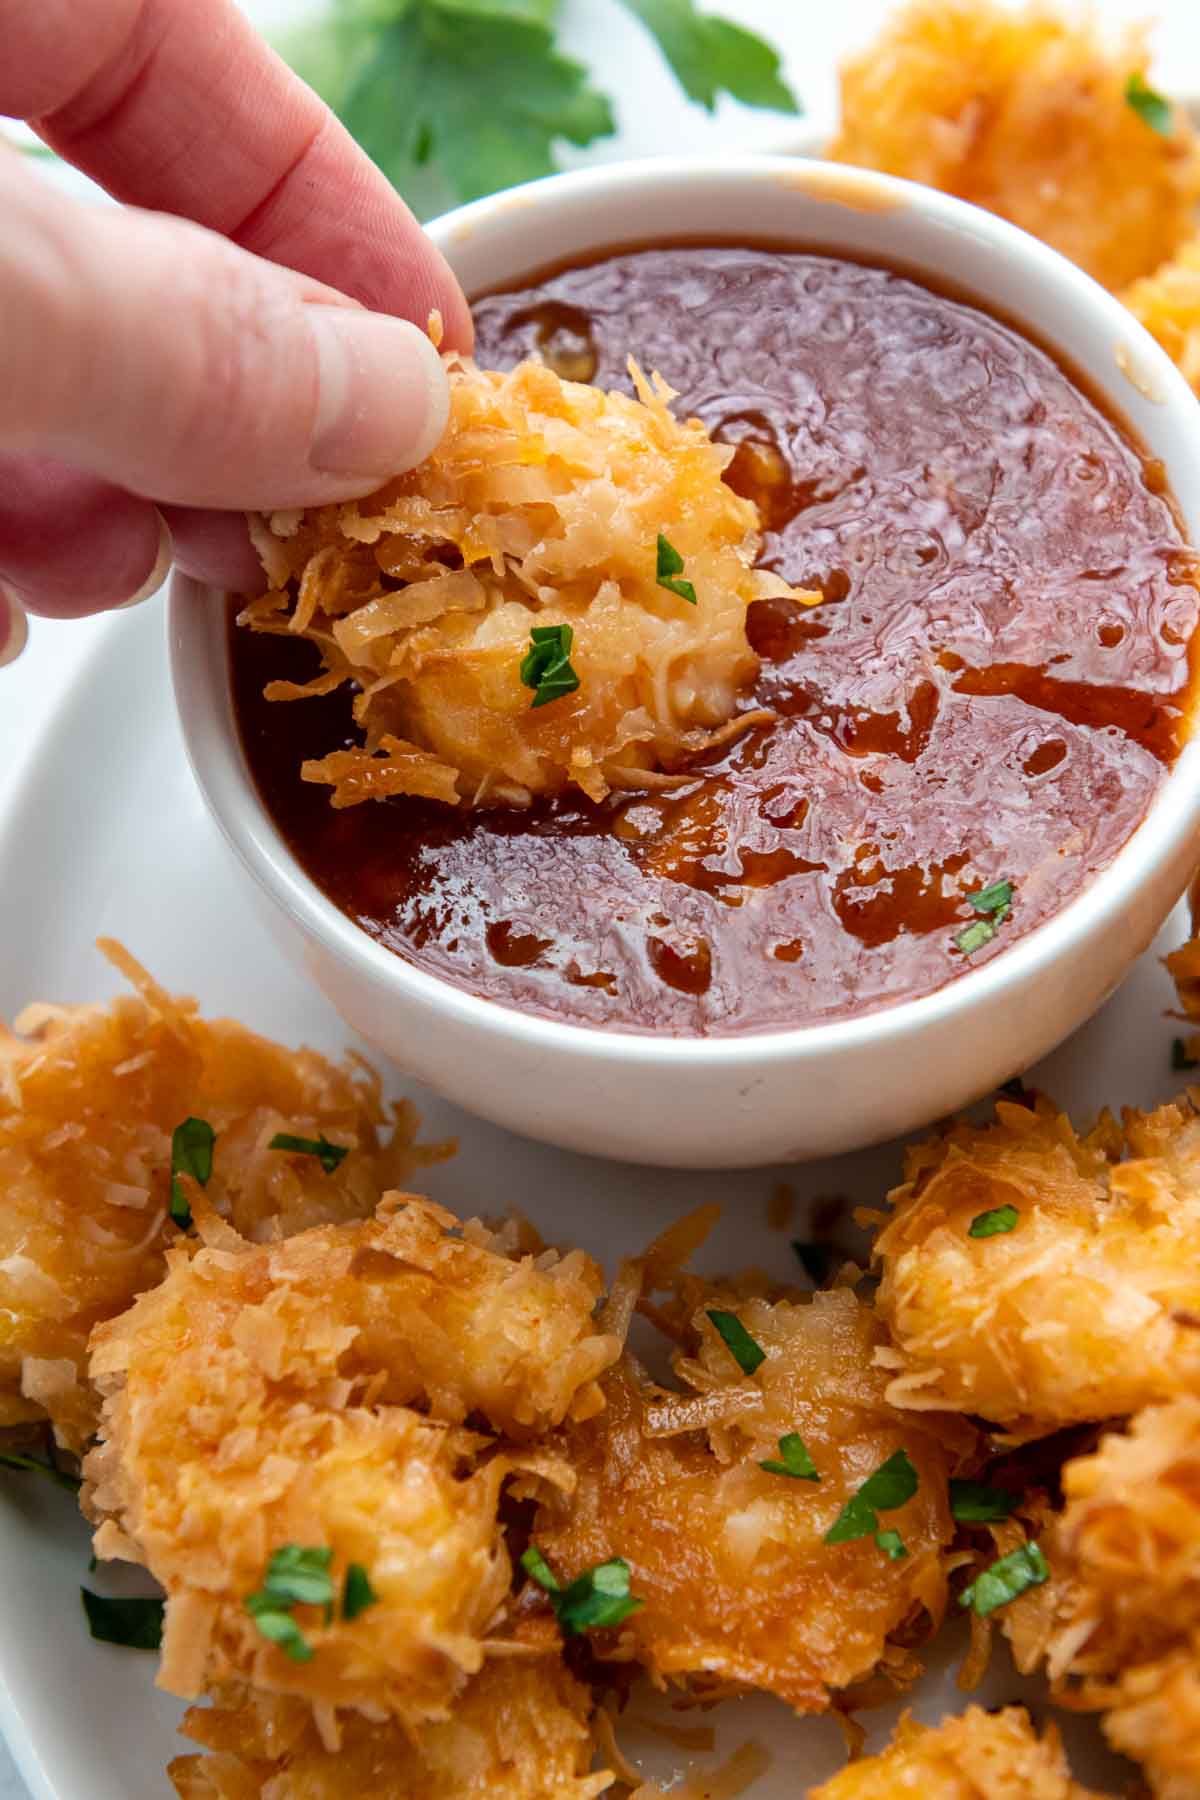 a shrimp being dipped into a sauce.